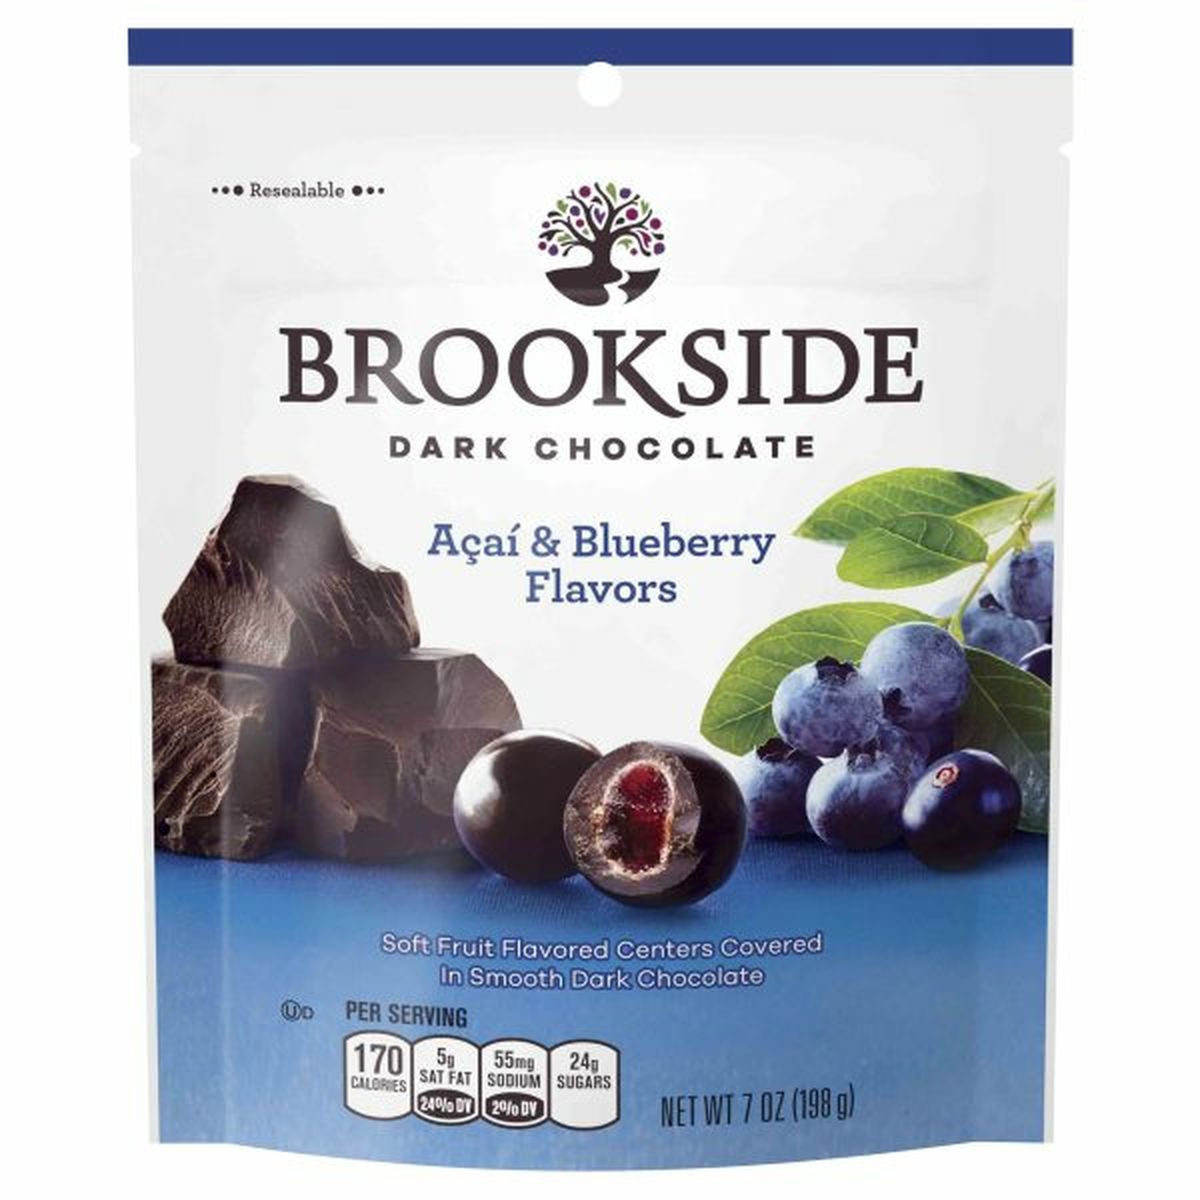 Calories in Brookside Dark Chocolate with Acai and Blueberry Flavors